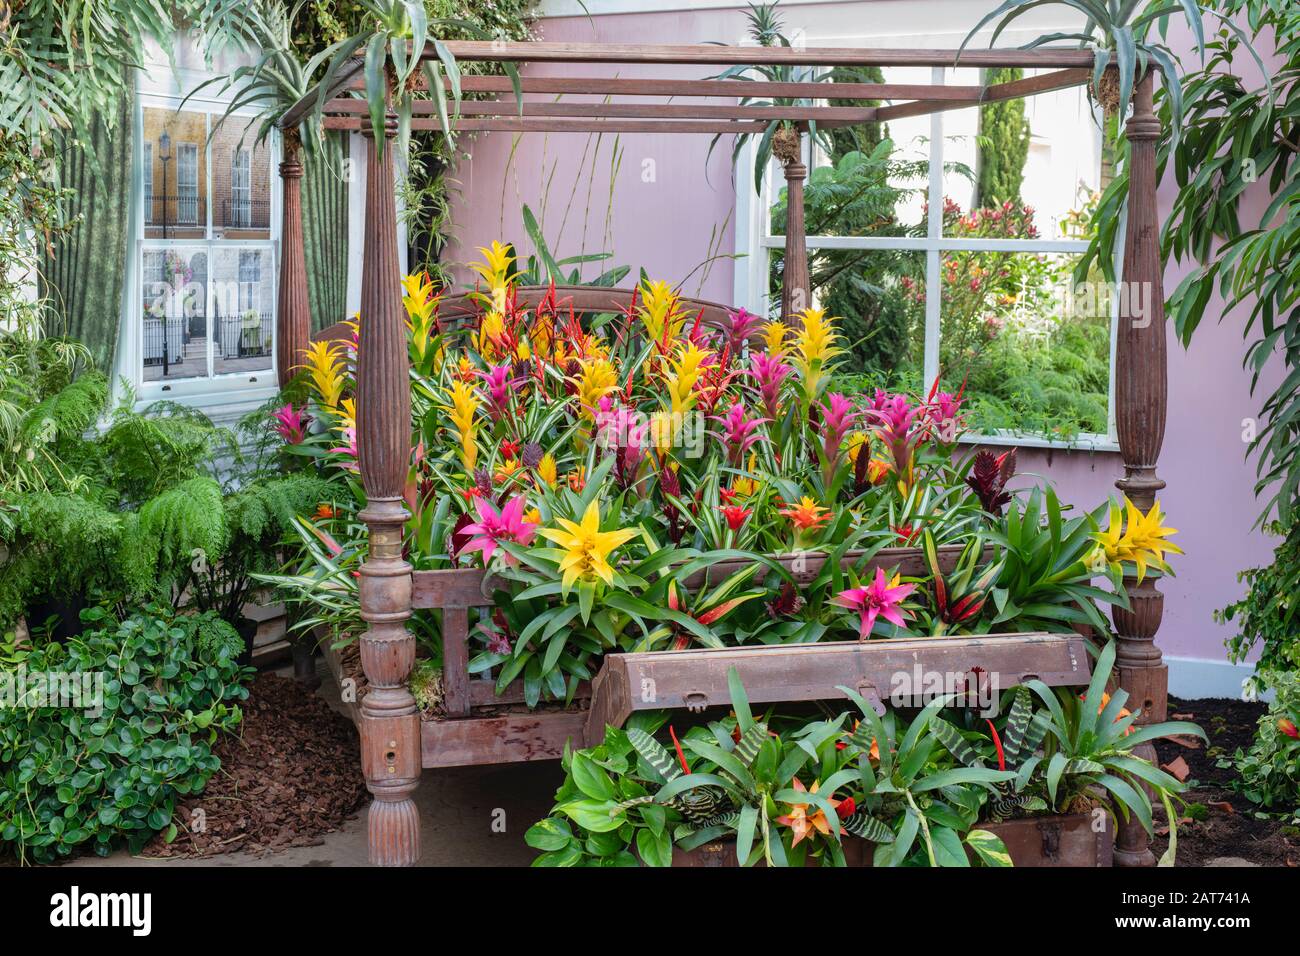 The Giant Houseplant Takeover display in the glasshouse at RHS Wisley gardens, Surrey, UK. Victorian house reclaimed by houseplants. January 2020 Stock Photo